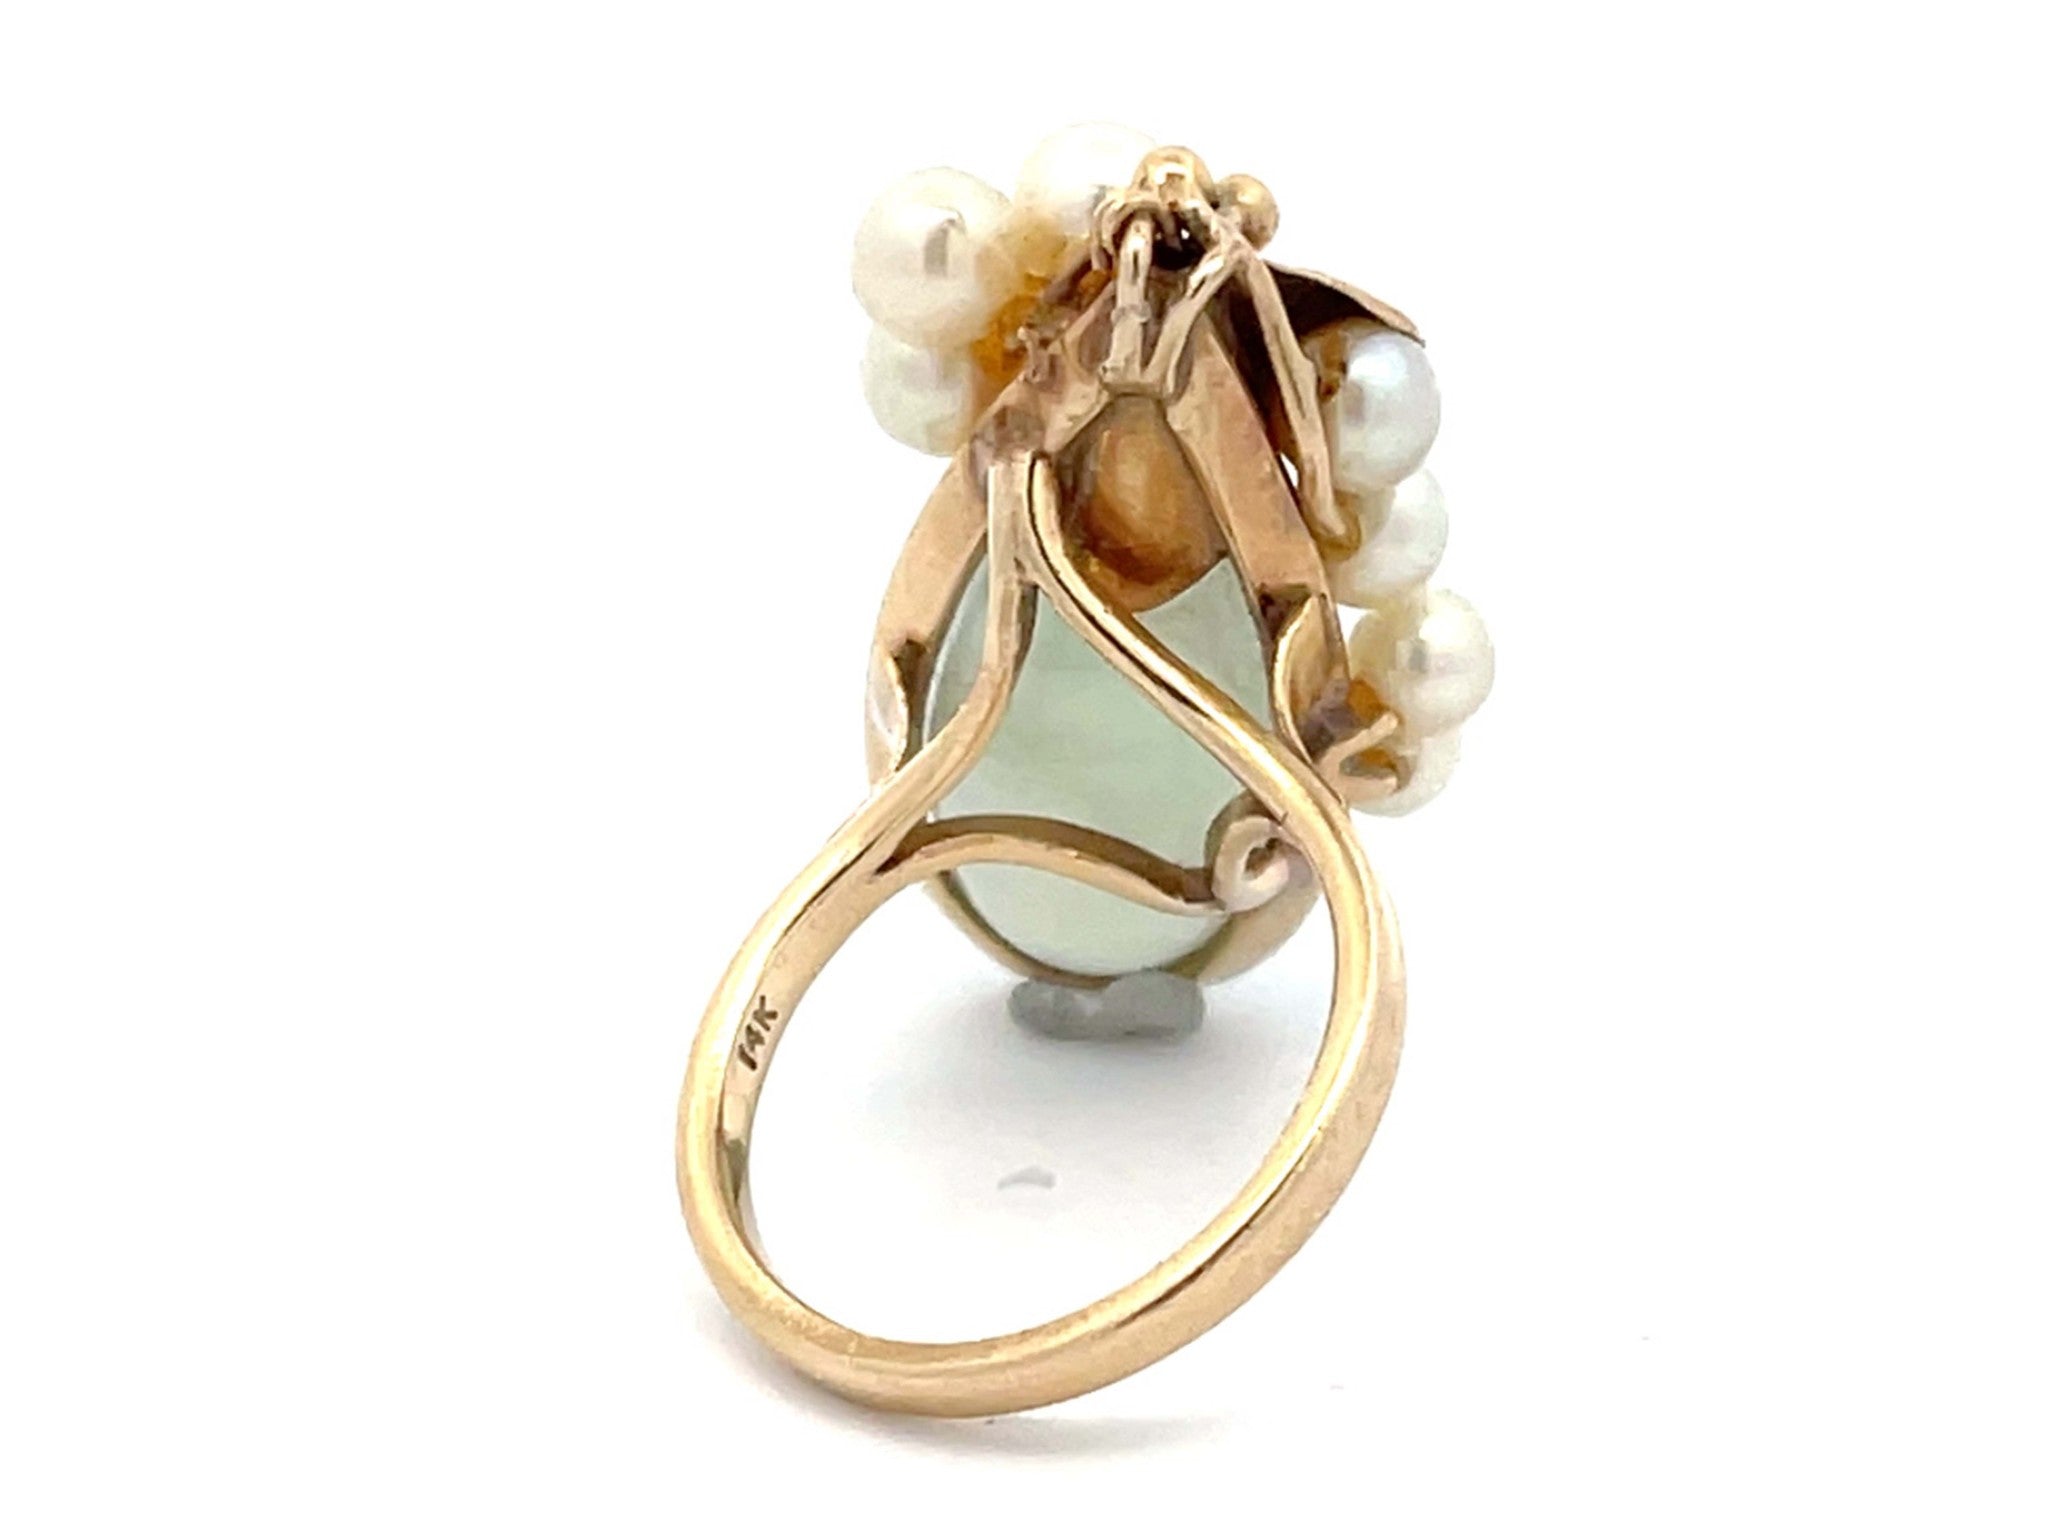 Mings Eggplant Shaped Jade and Pearl Leaf Ring in 14k Yellow Gold